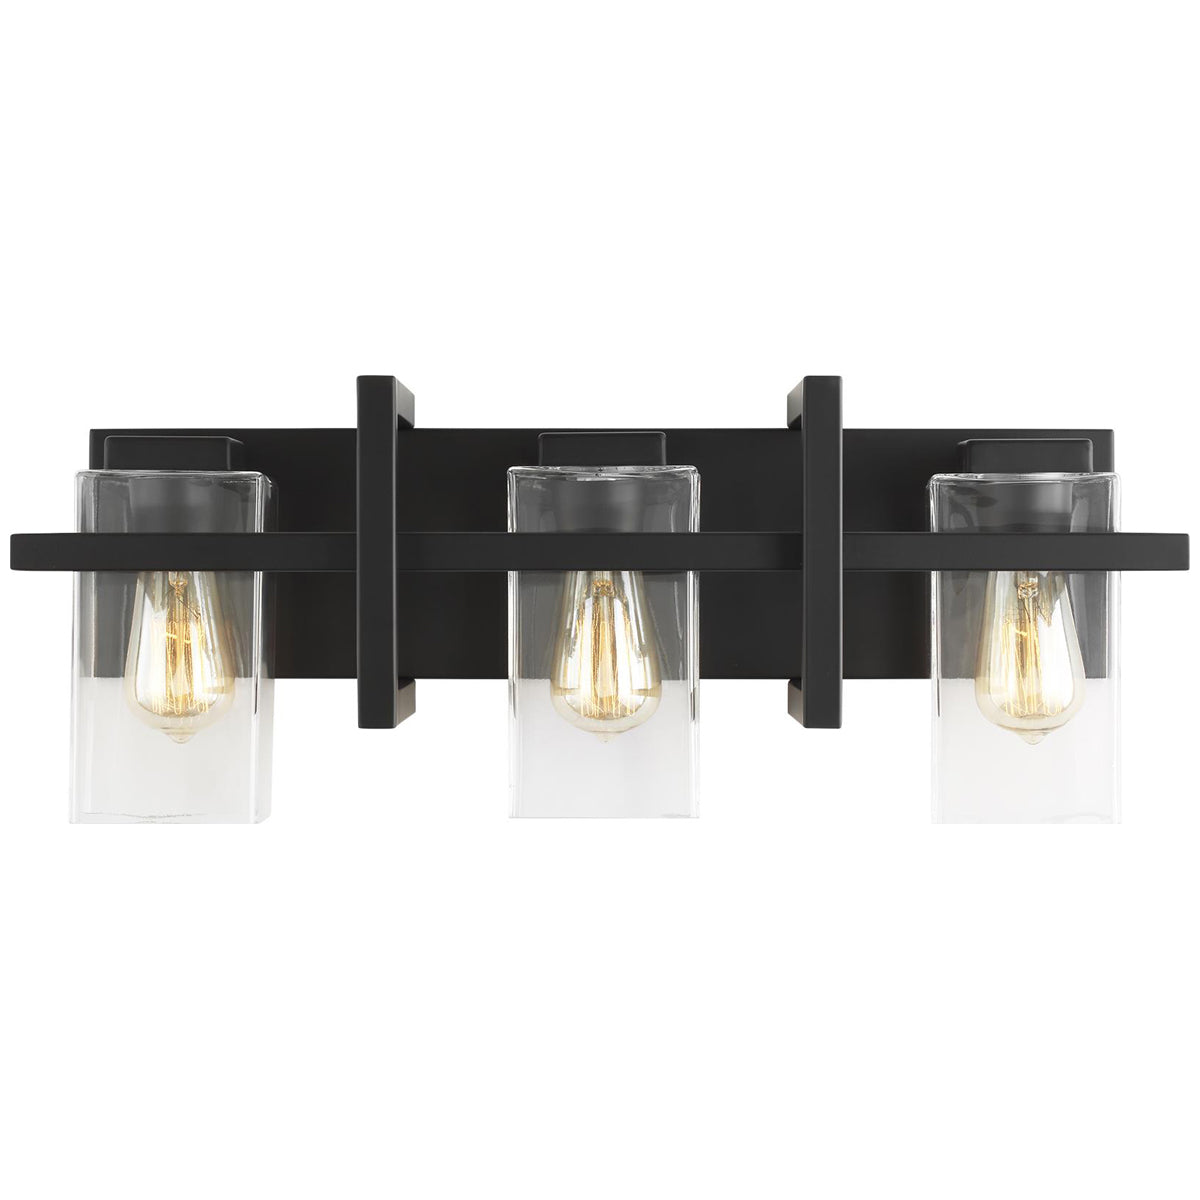 Sea Gull Lighting Mitte 3-Light Wall/Bath Sconce without Bulb